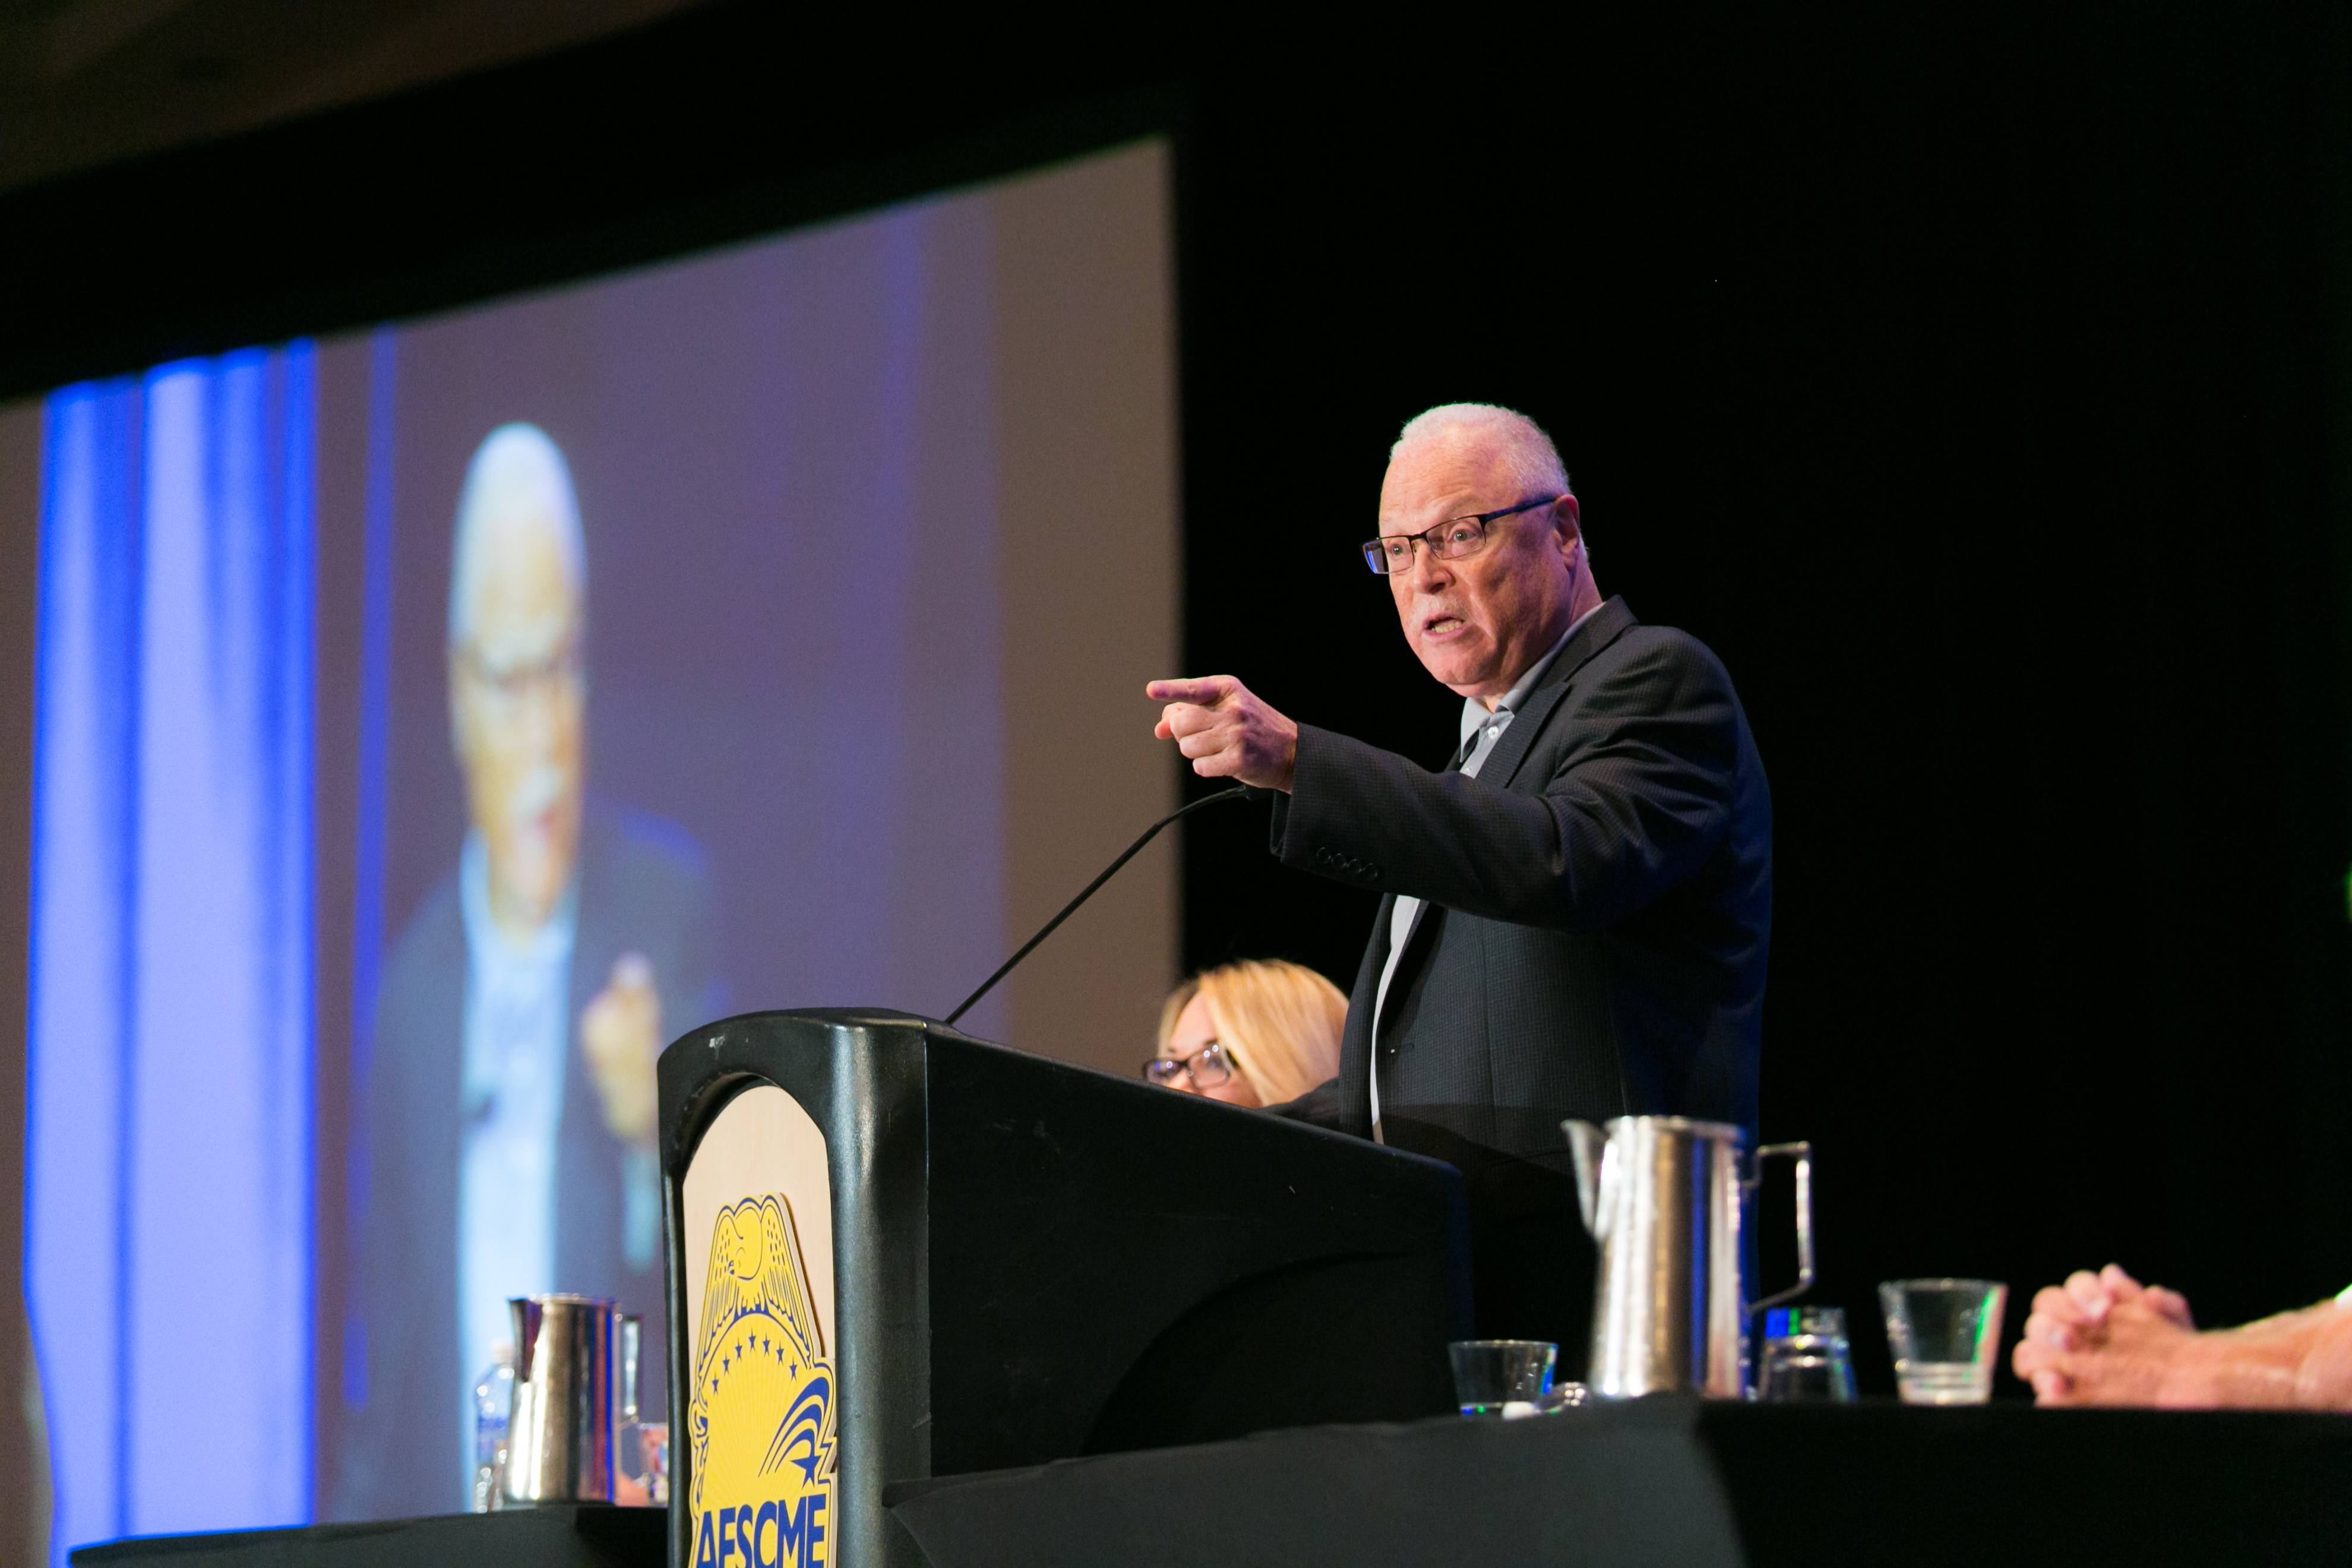 Public Safety Congress Gets AFSCME Strong